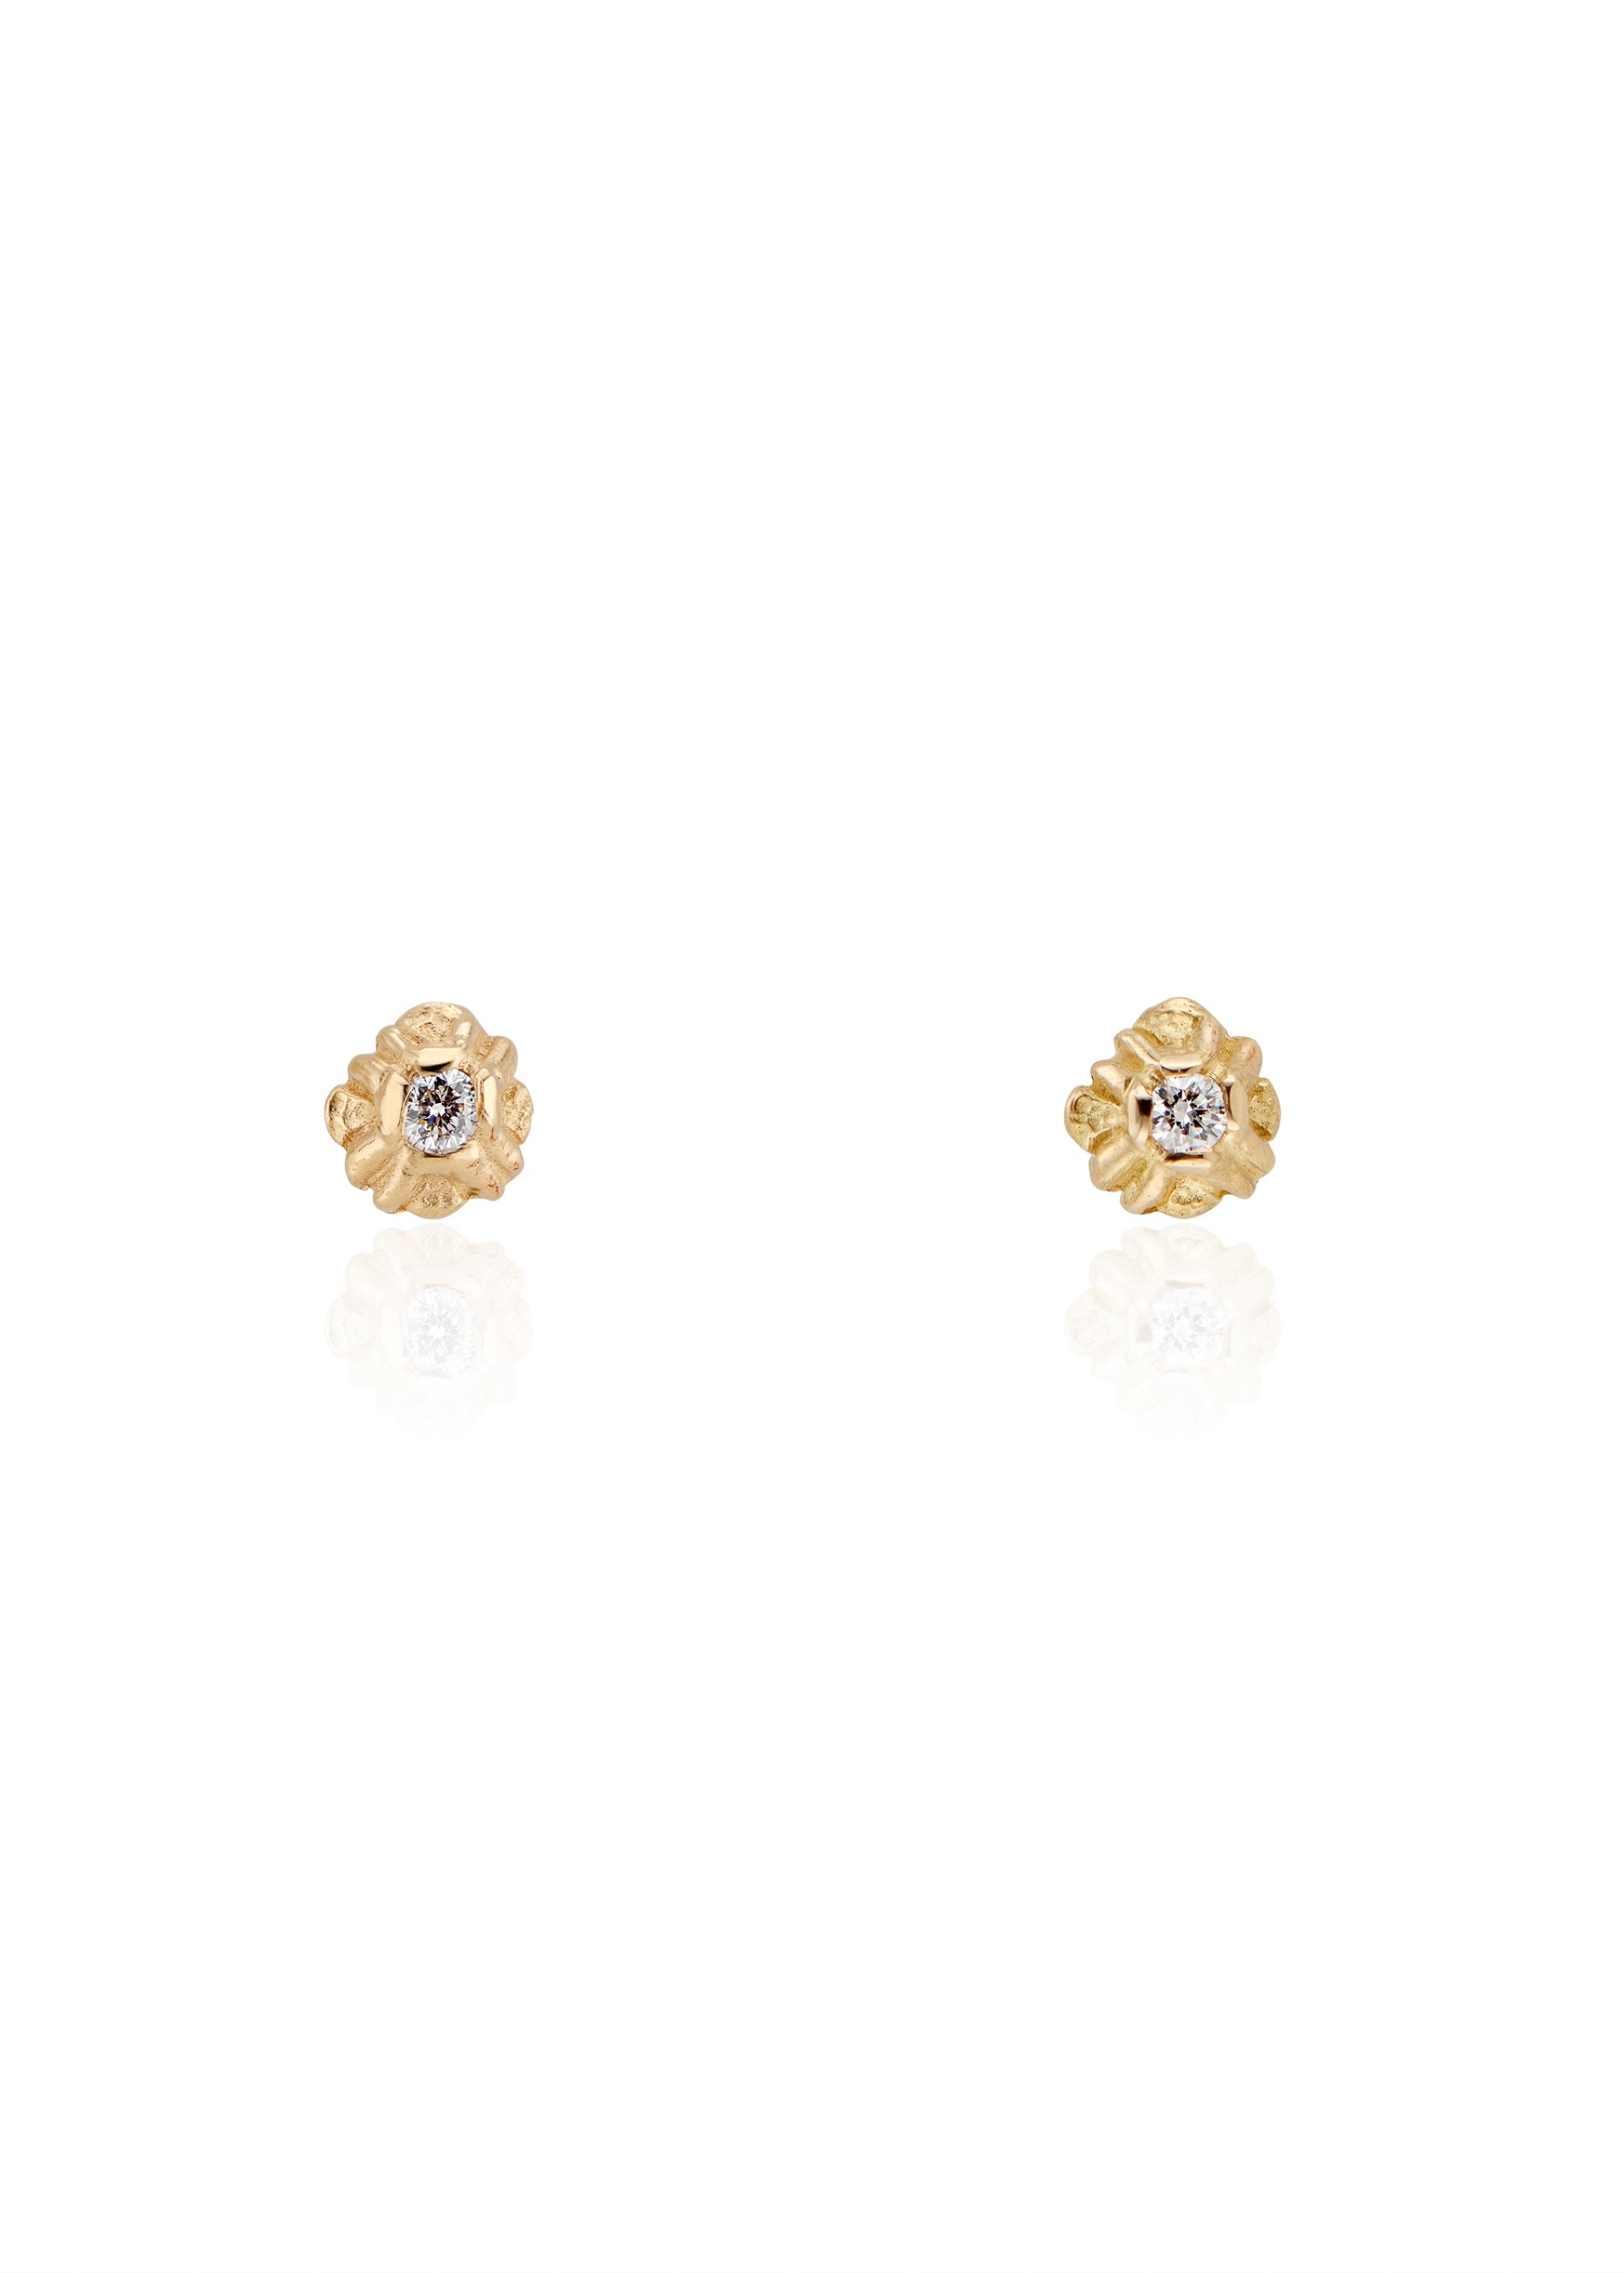 Evocative of a flower turning its face to the last kiss of golden hour sun, the Sorrel earring radiates warmth and botanical beauty. Hand-carved stud earrings are accented with brilliant diamonds, a timeless and romantic style favored for everyday wear. 